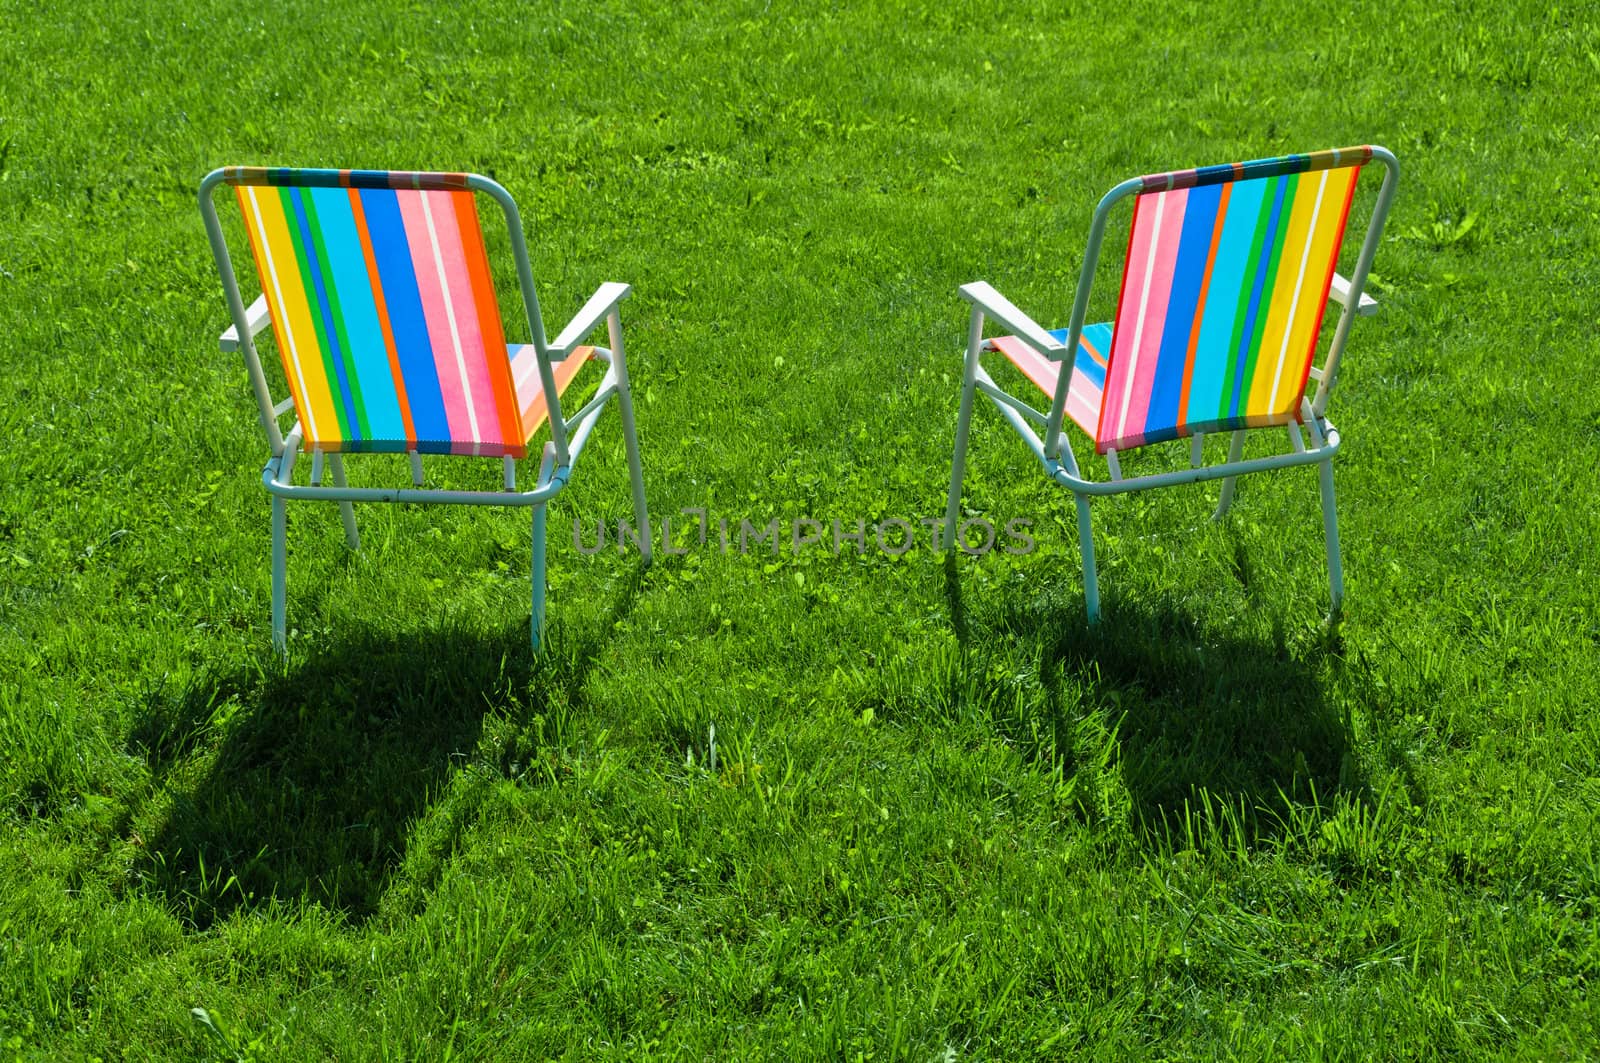 Two colorful chairs standing on grass at back yard